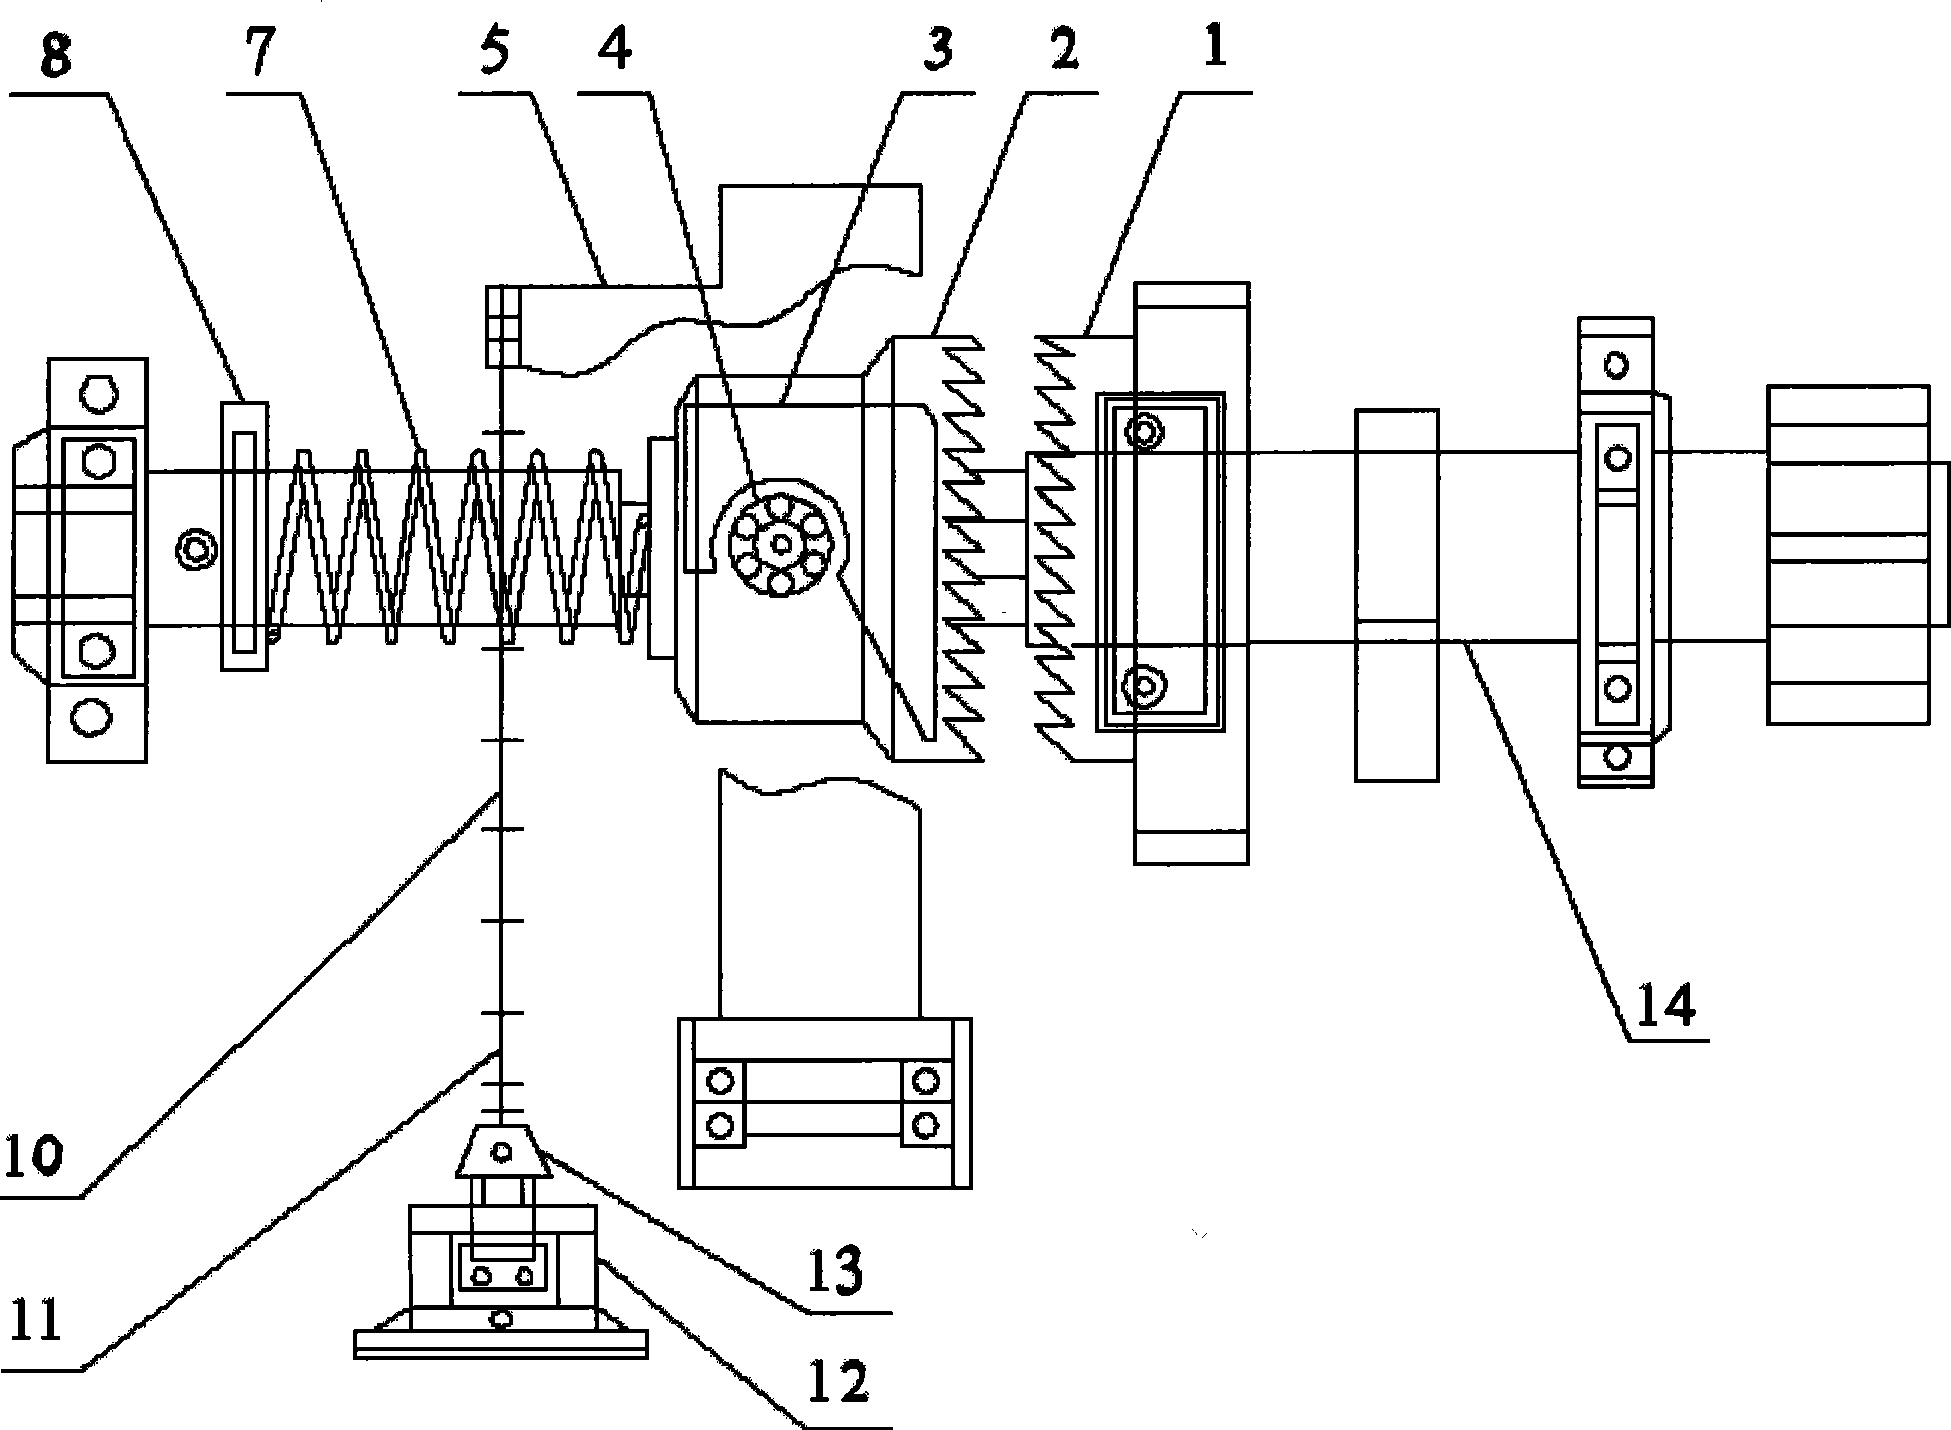 Rapid clutch device for straightening shearing machine for wire